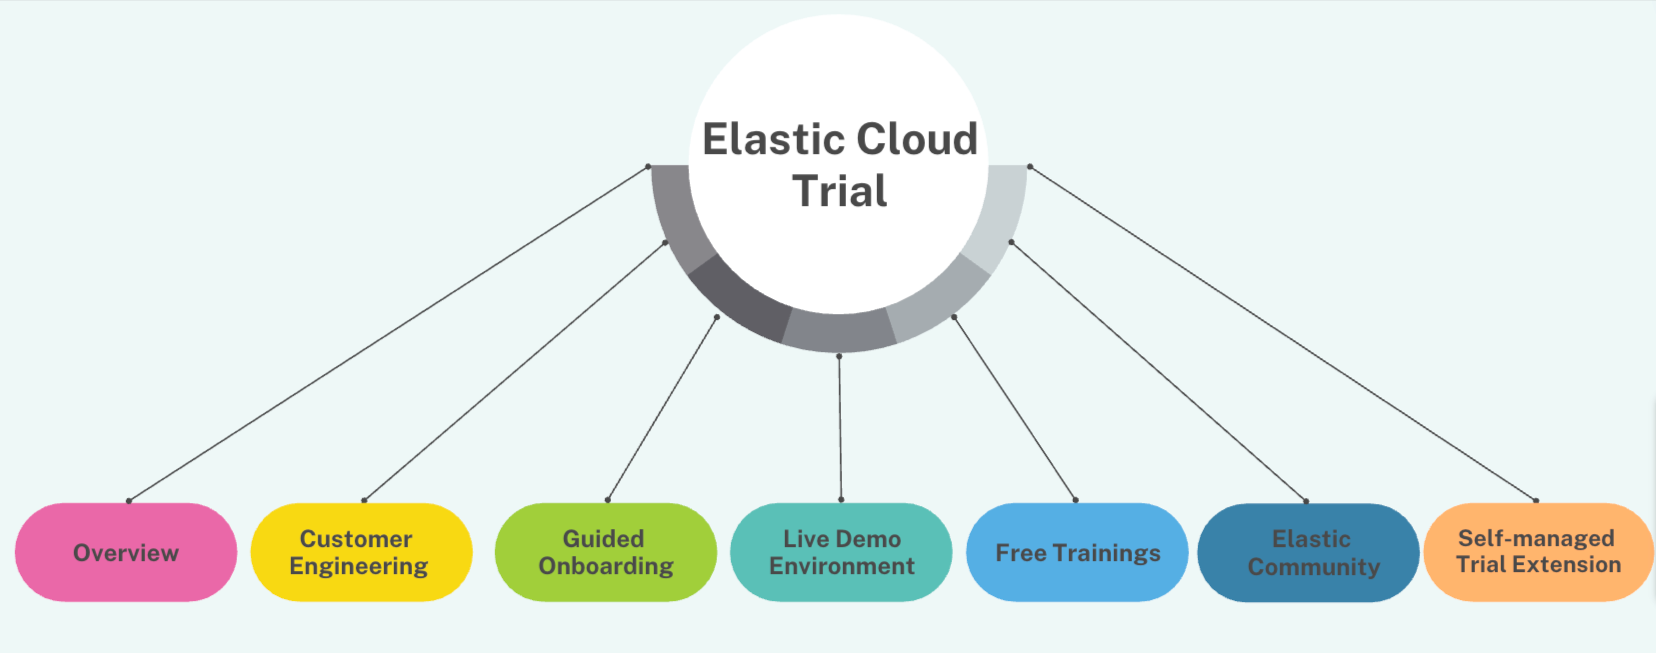 How to get the most from your Elastic Cloud trial